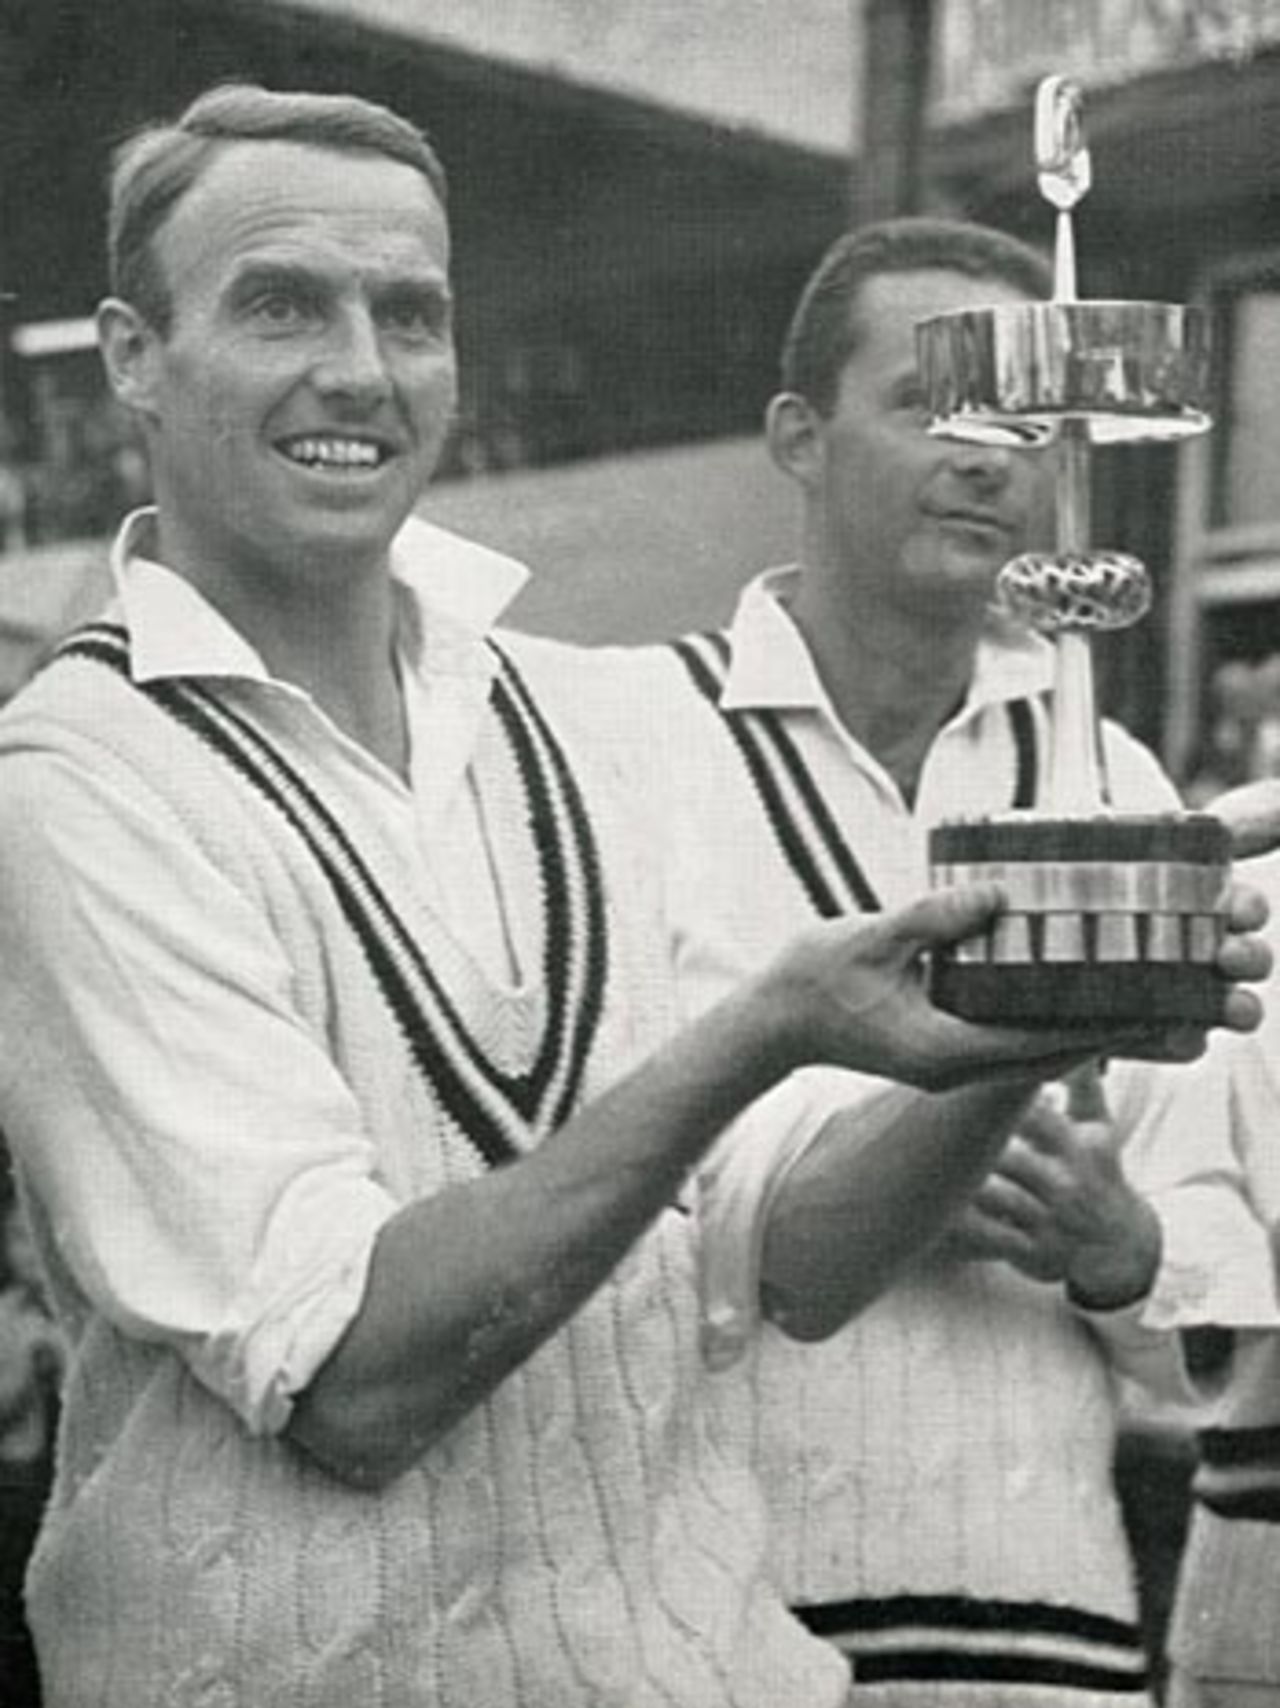 Alan Smith with the Gillette Cup after Warwickshire's win in the 1968 final